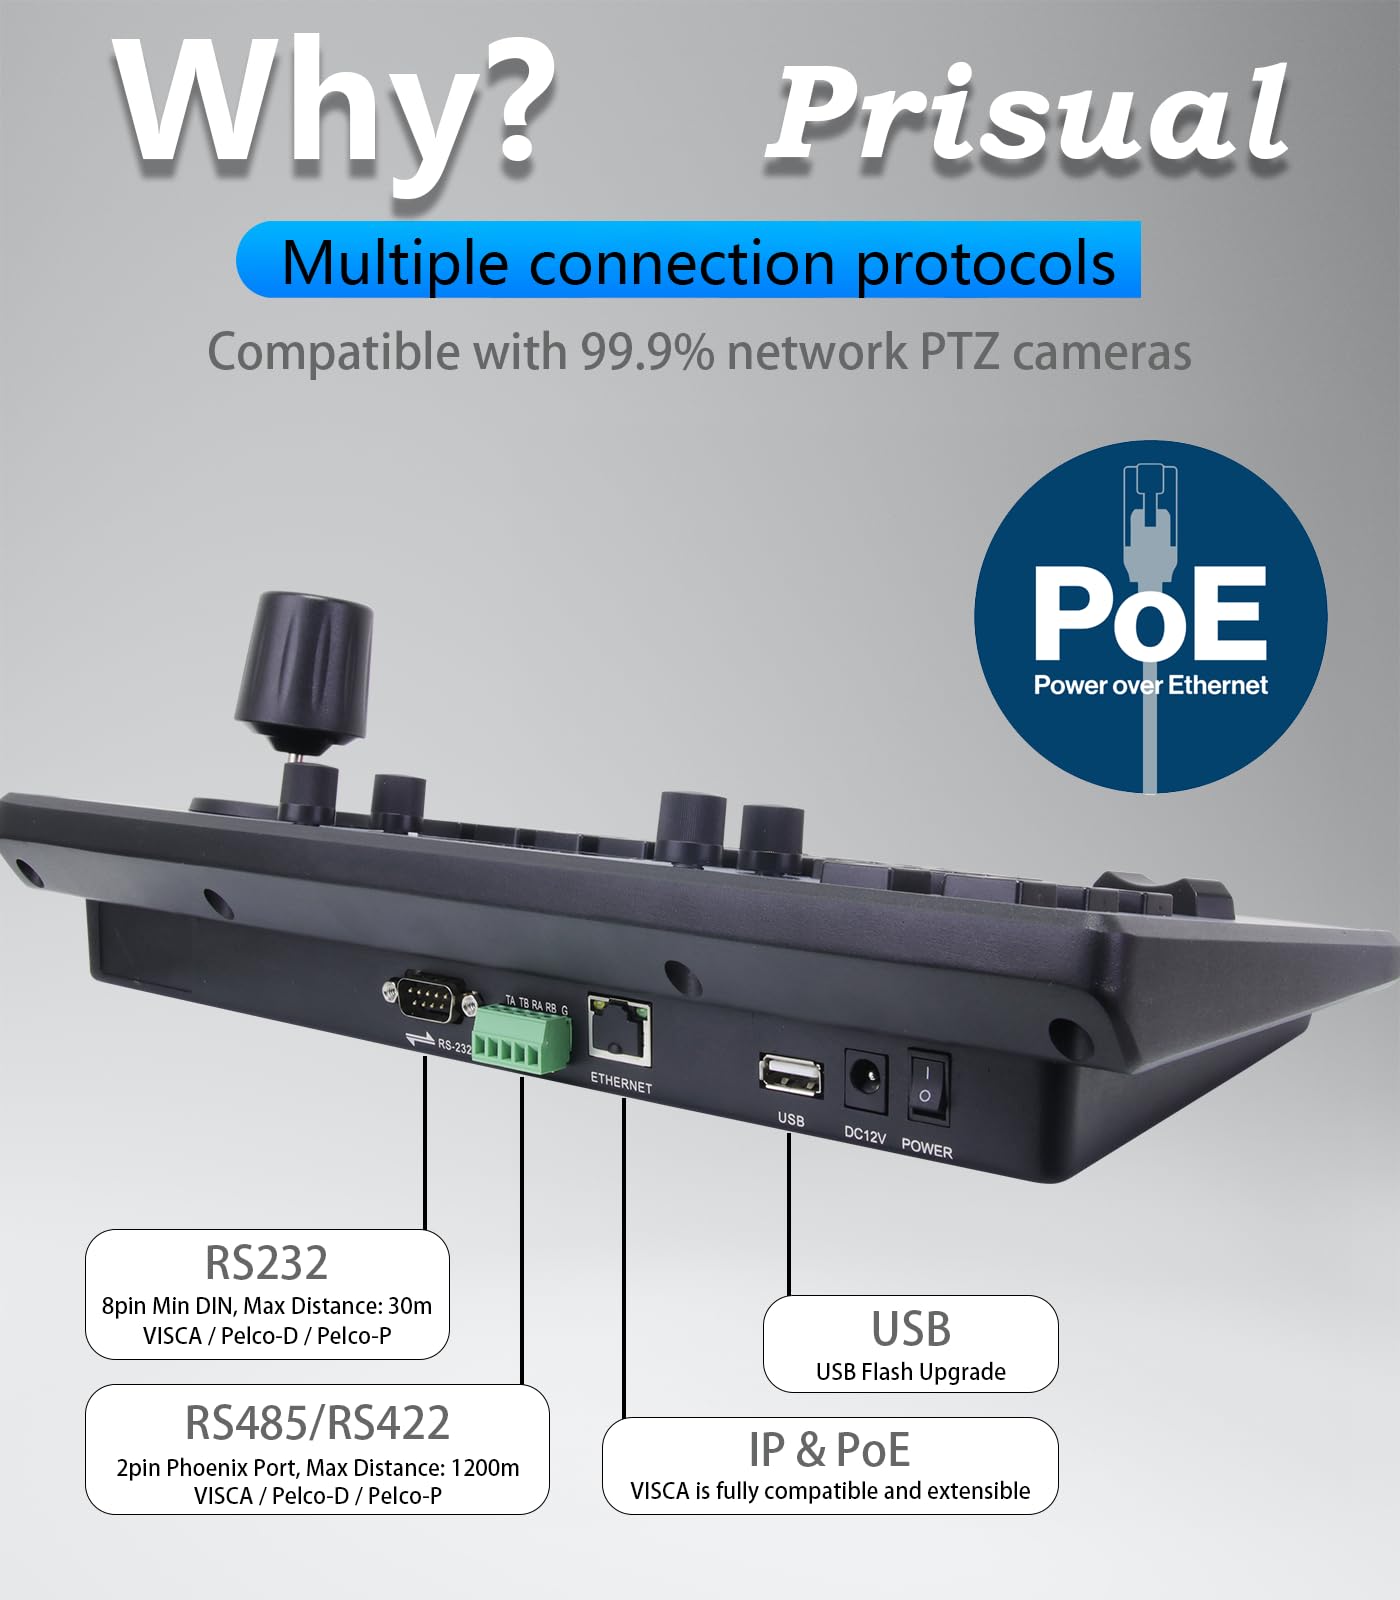 Prisual PTZ Camera Controller PoE 4D Joystick LCD Screen Setup, Elevate Your Church Live Streaming with VISCA is Fully Compatible and extensible, Pelco D/P RS232 RS485 (TEM-JOY1)